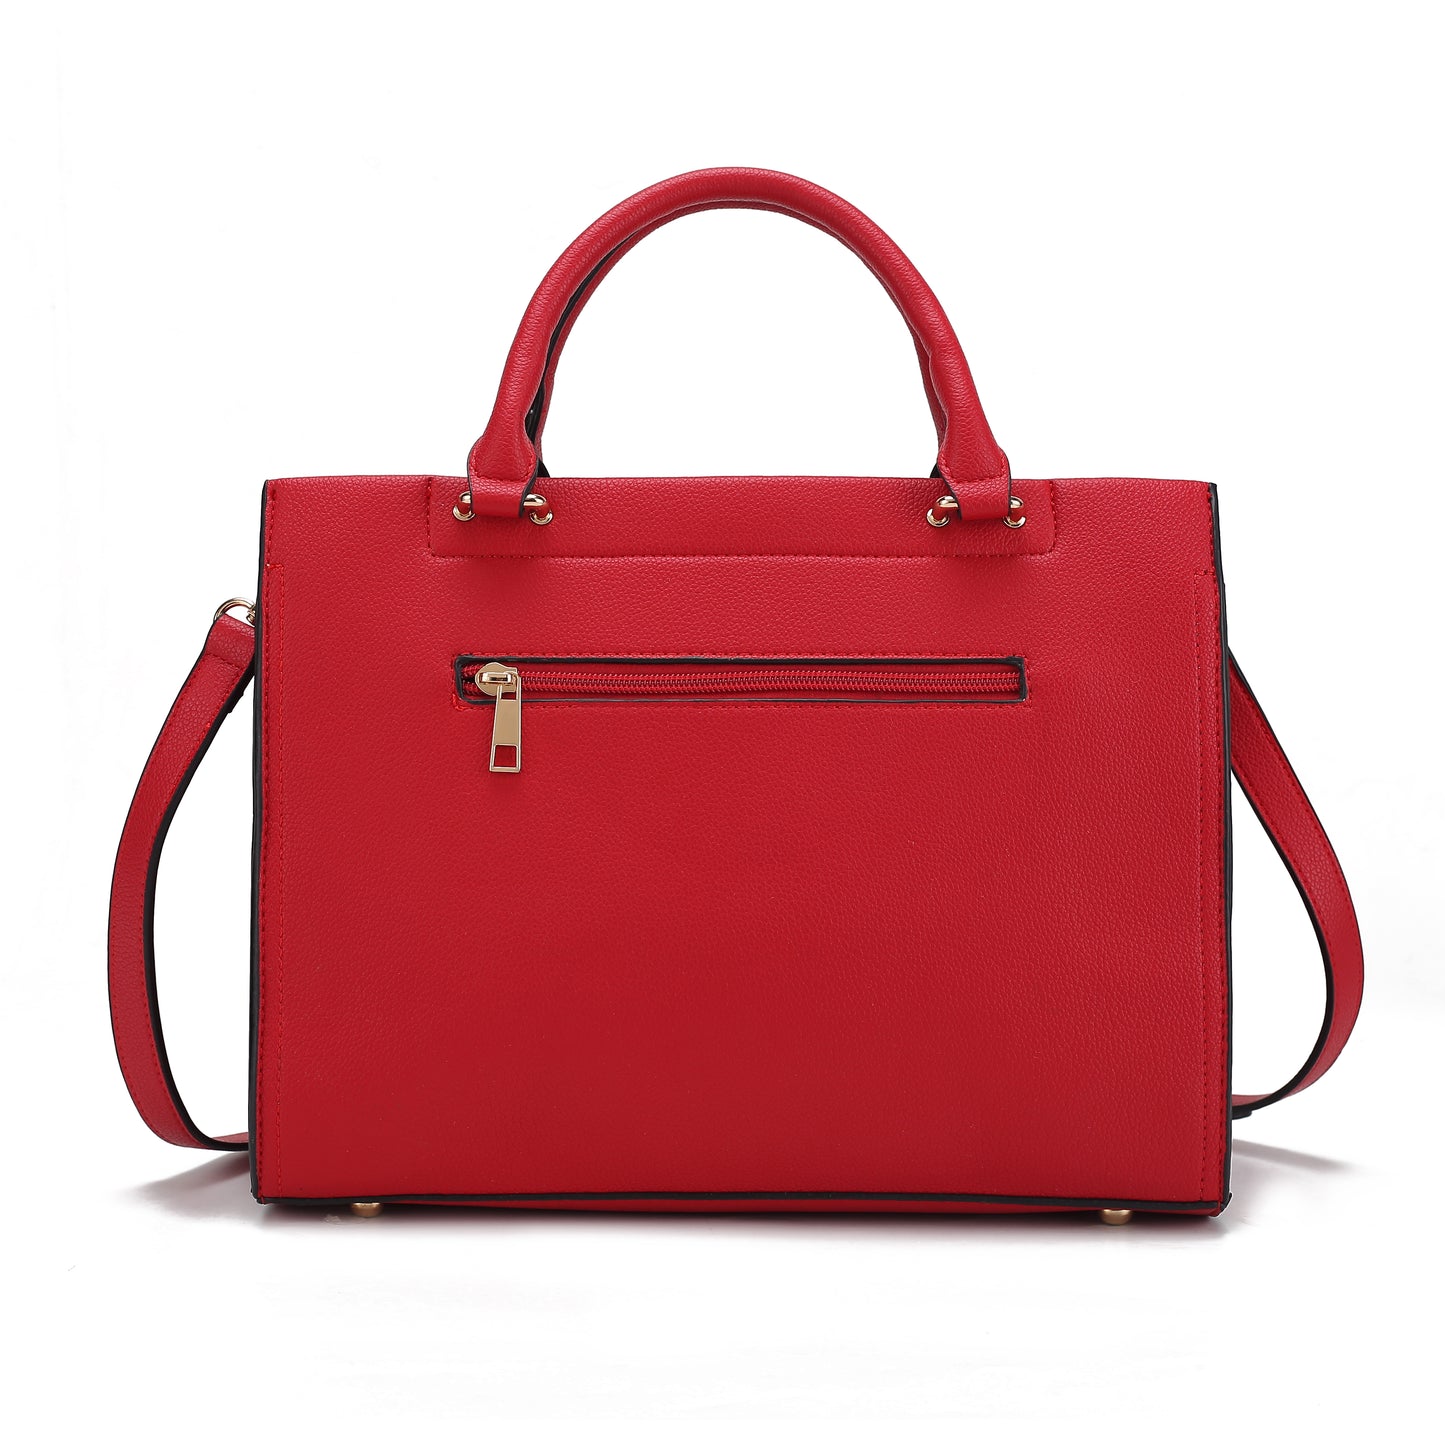 A Virginia Vegan Leather Women Tote Bag with Wallet by Pink Orpheus, a red crocodile-embossed handbag with two handles and a zipper.